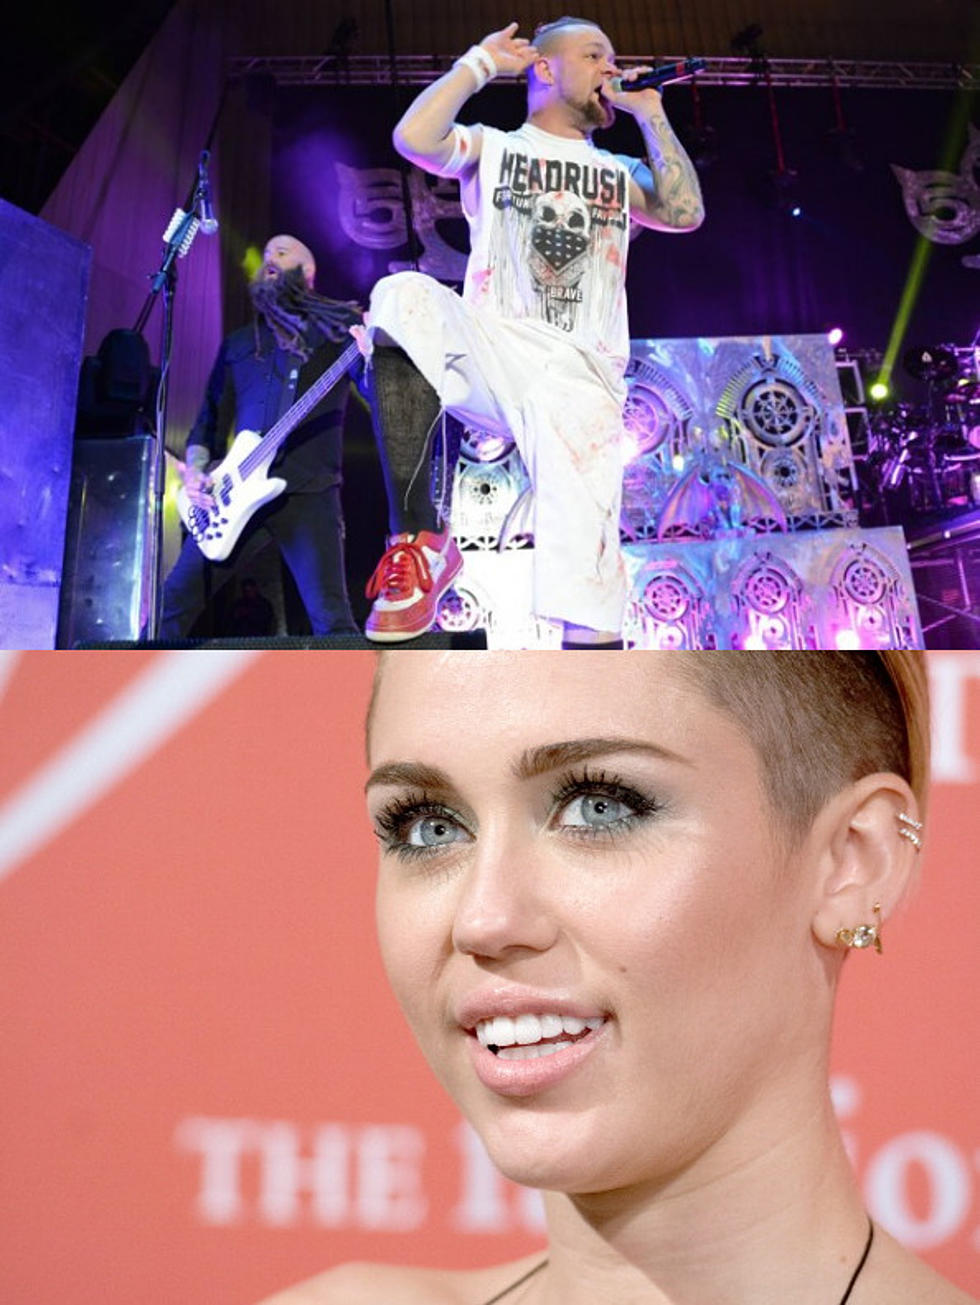 Do Ivan Moody And Miley Cyrus Have Some Thing In Common? [VIDEO]